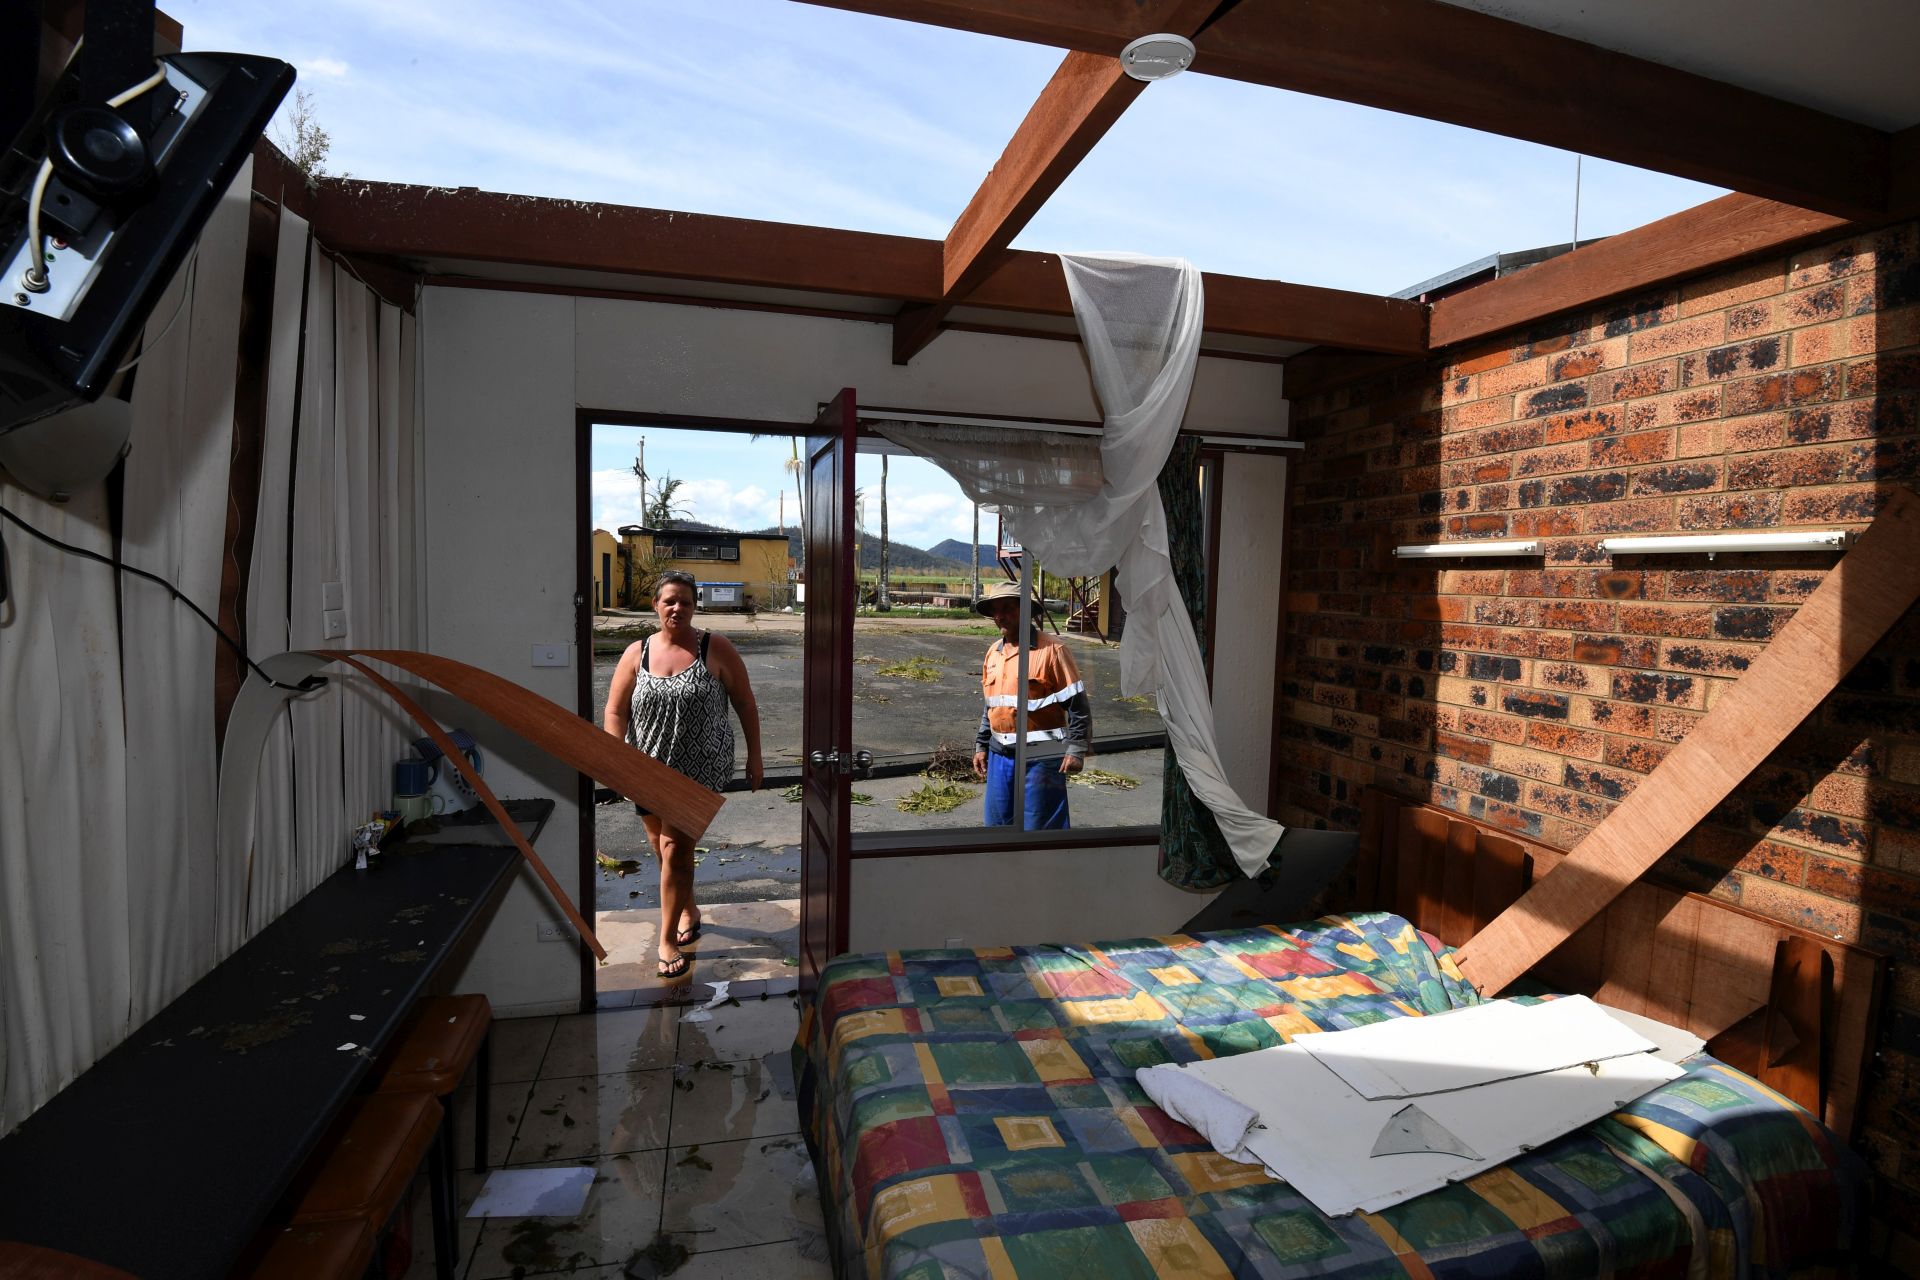 epa05878282 Kerry Campbell and Peter Stokes inspect damage to their motel in Proserpine, Queensland, Australia, 30 March 2017. Cyclone Debbie hit Queensland's north coast on 28 March as a category 4 cyclone, causing wide spread damage. A severe rain depression is currently taking place throughout south-east Queensland following ex-Tropical Cyclone Debbie.  EPA/DAN PELED  AUSTRALIA AND NEW ZEALAND OUT